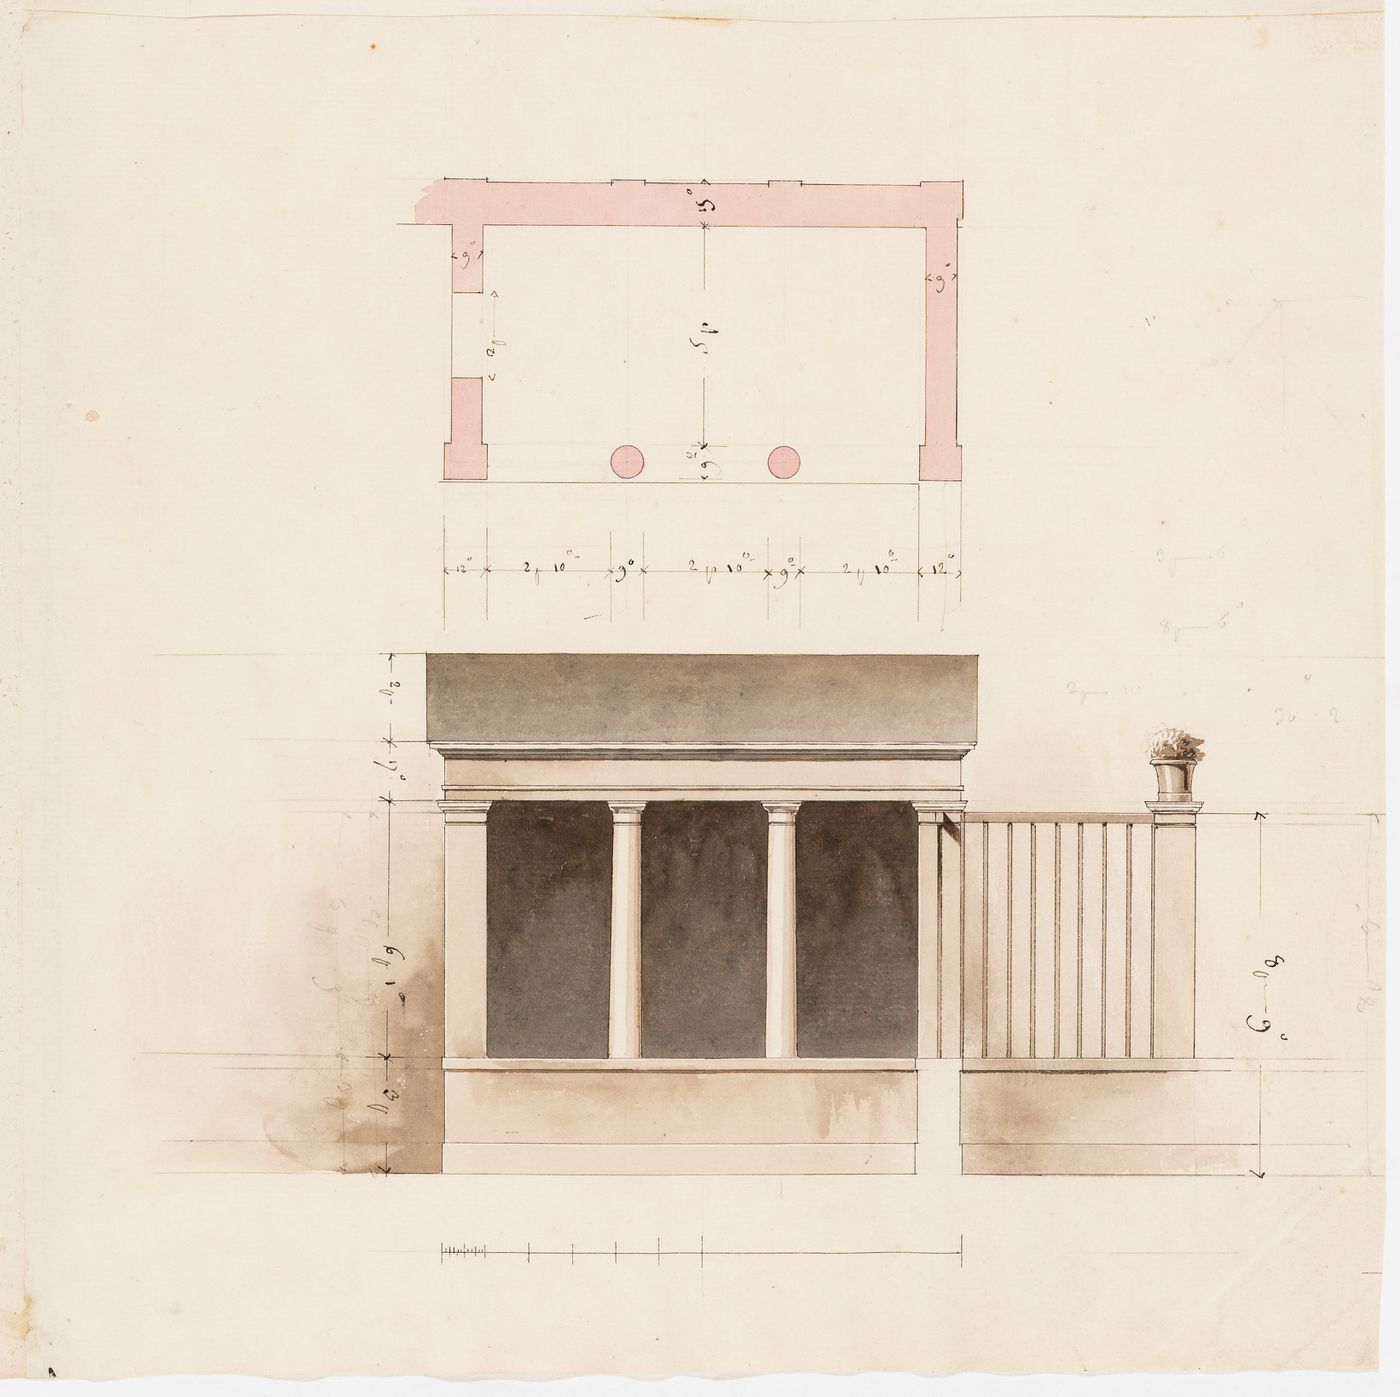 Plan and elevation for a pavilion, probably for a "guinguette"